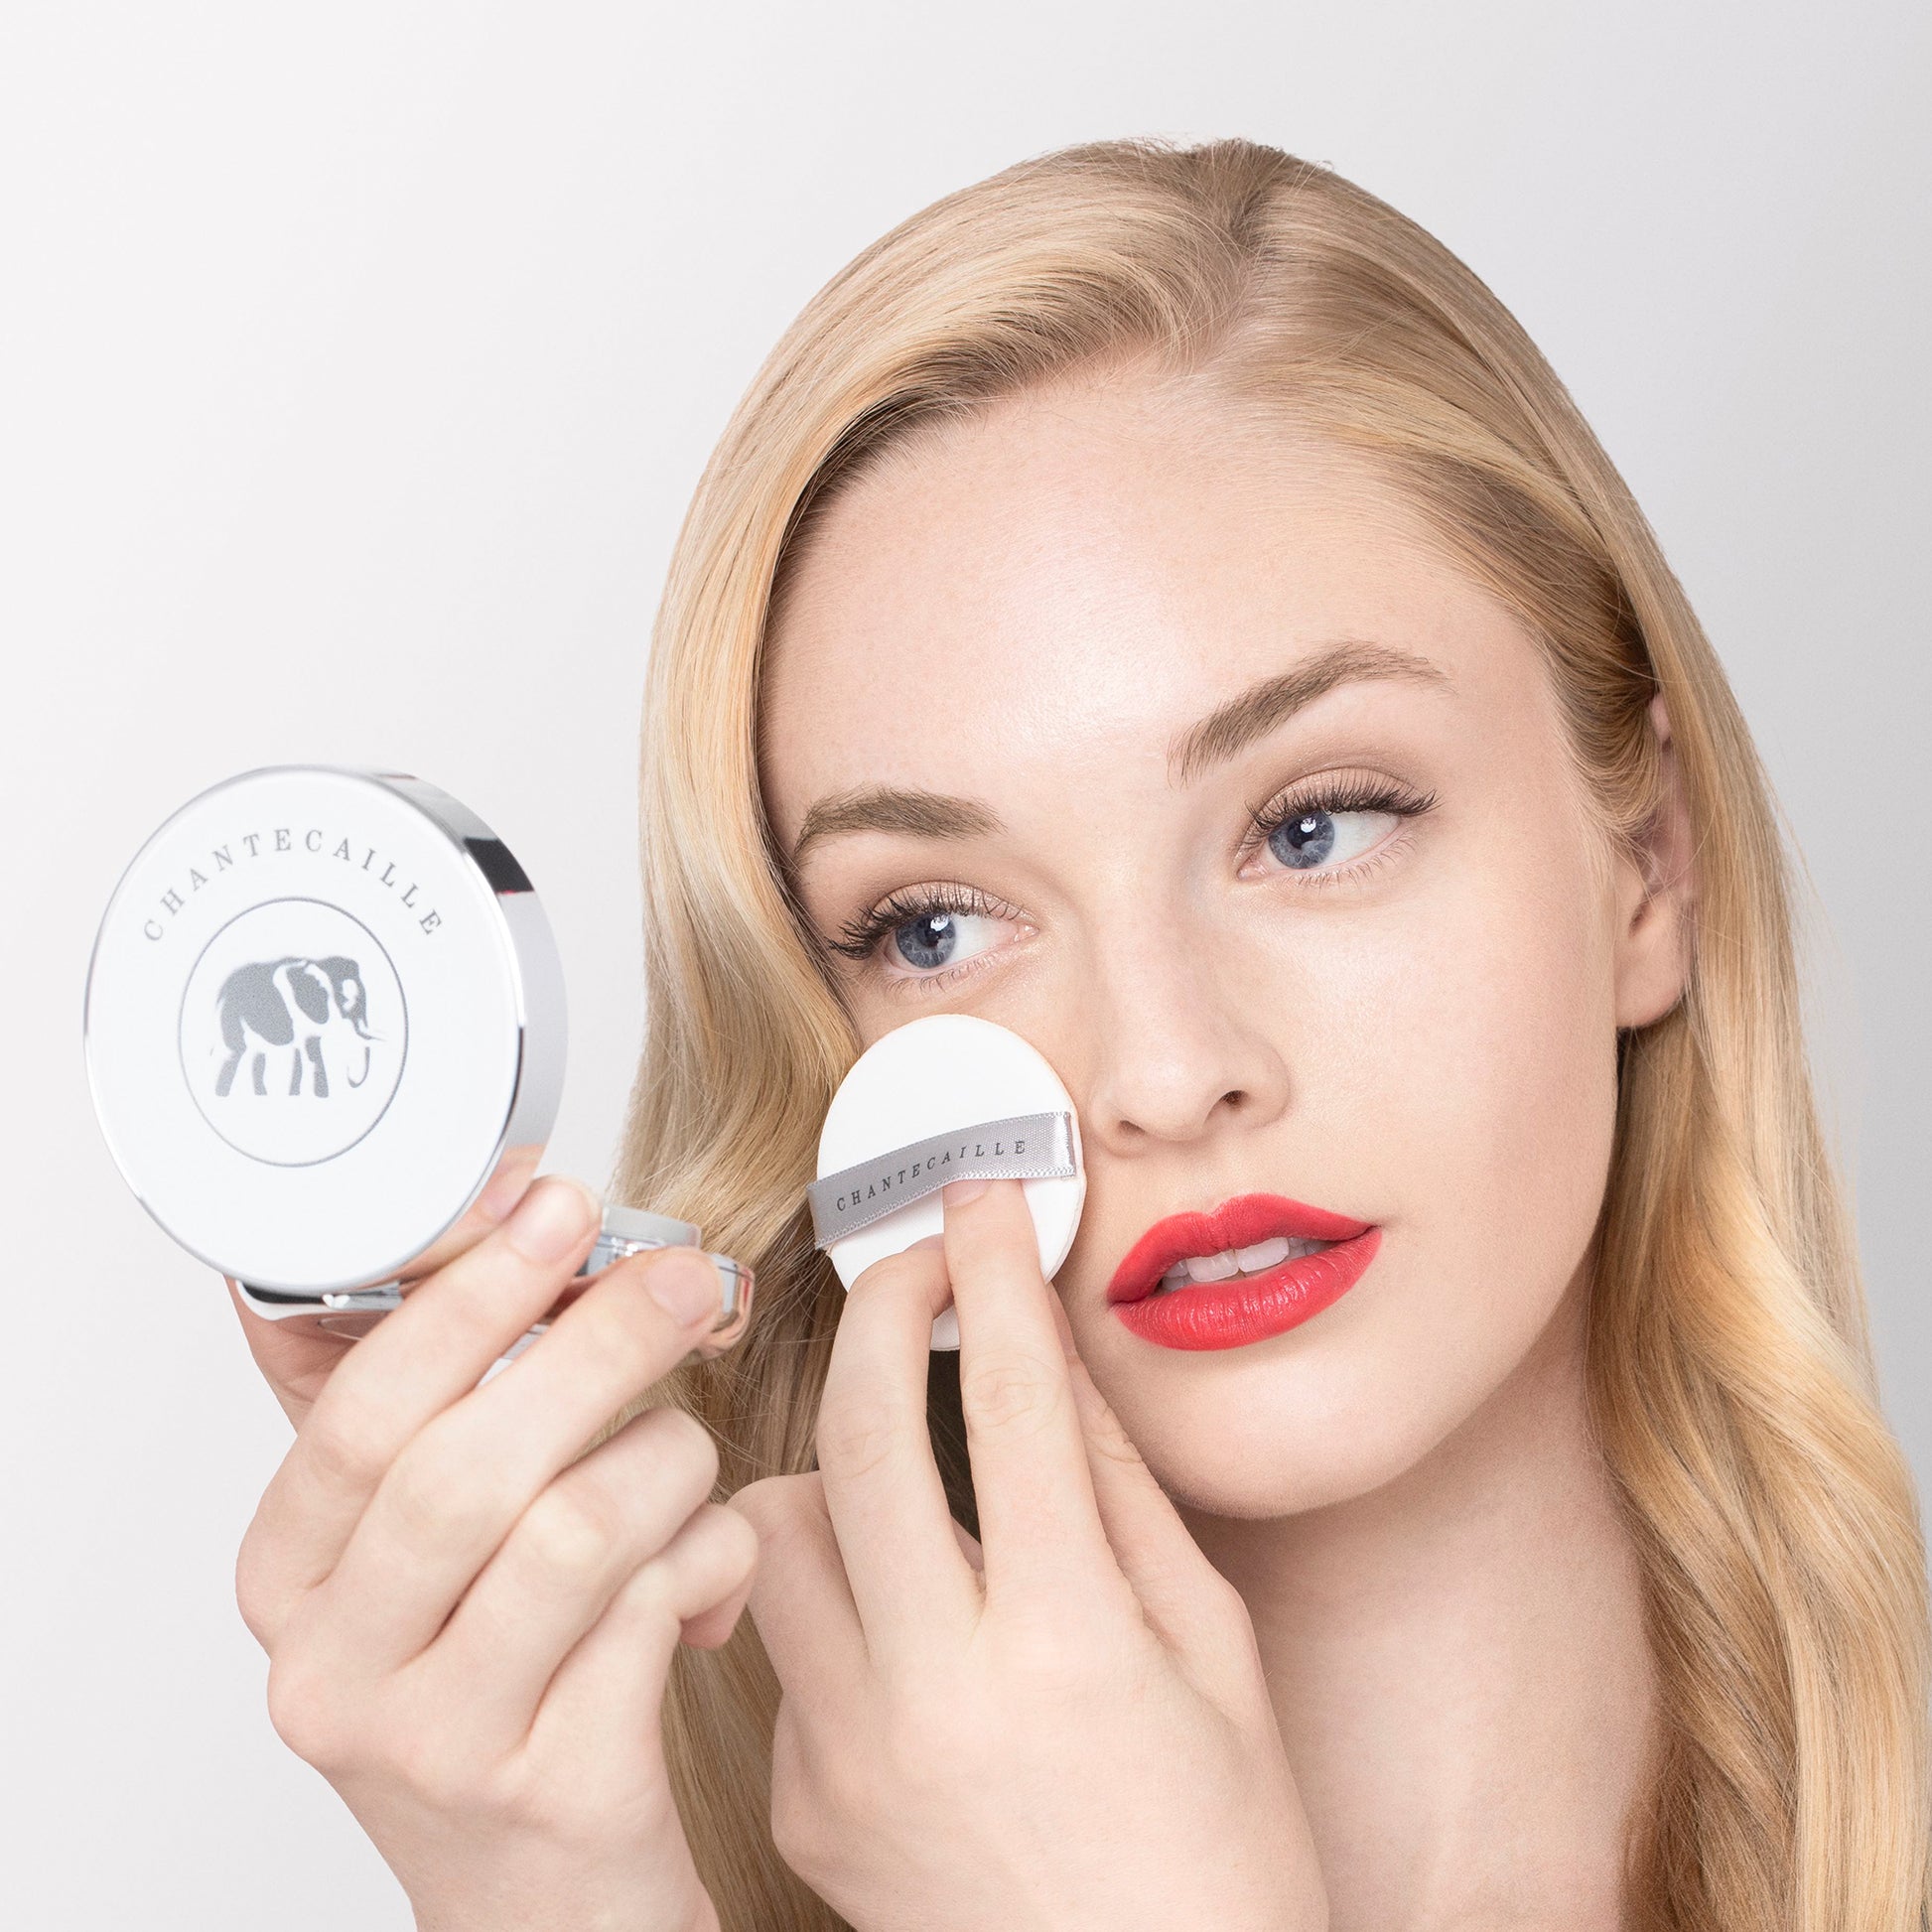 10 Dior Beauty Promo Gift Codes - Makeup Pouches, Compact Mirror